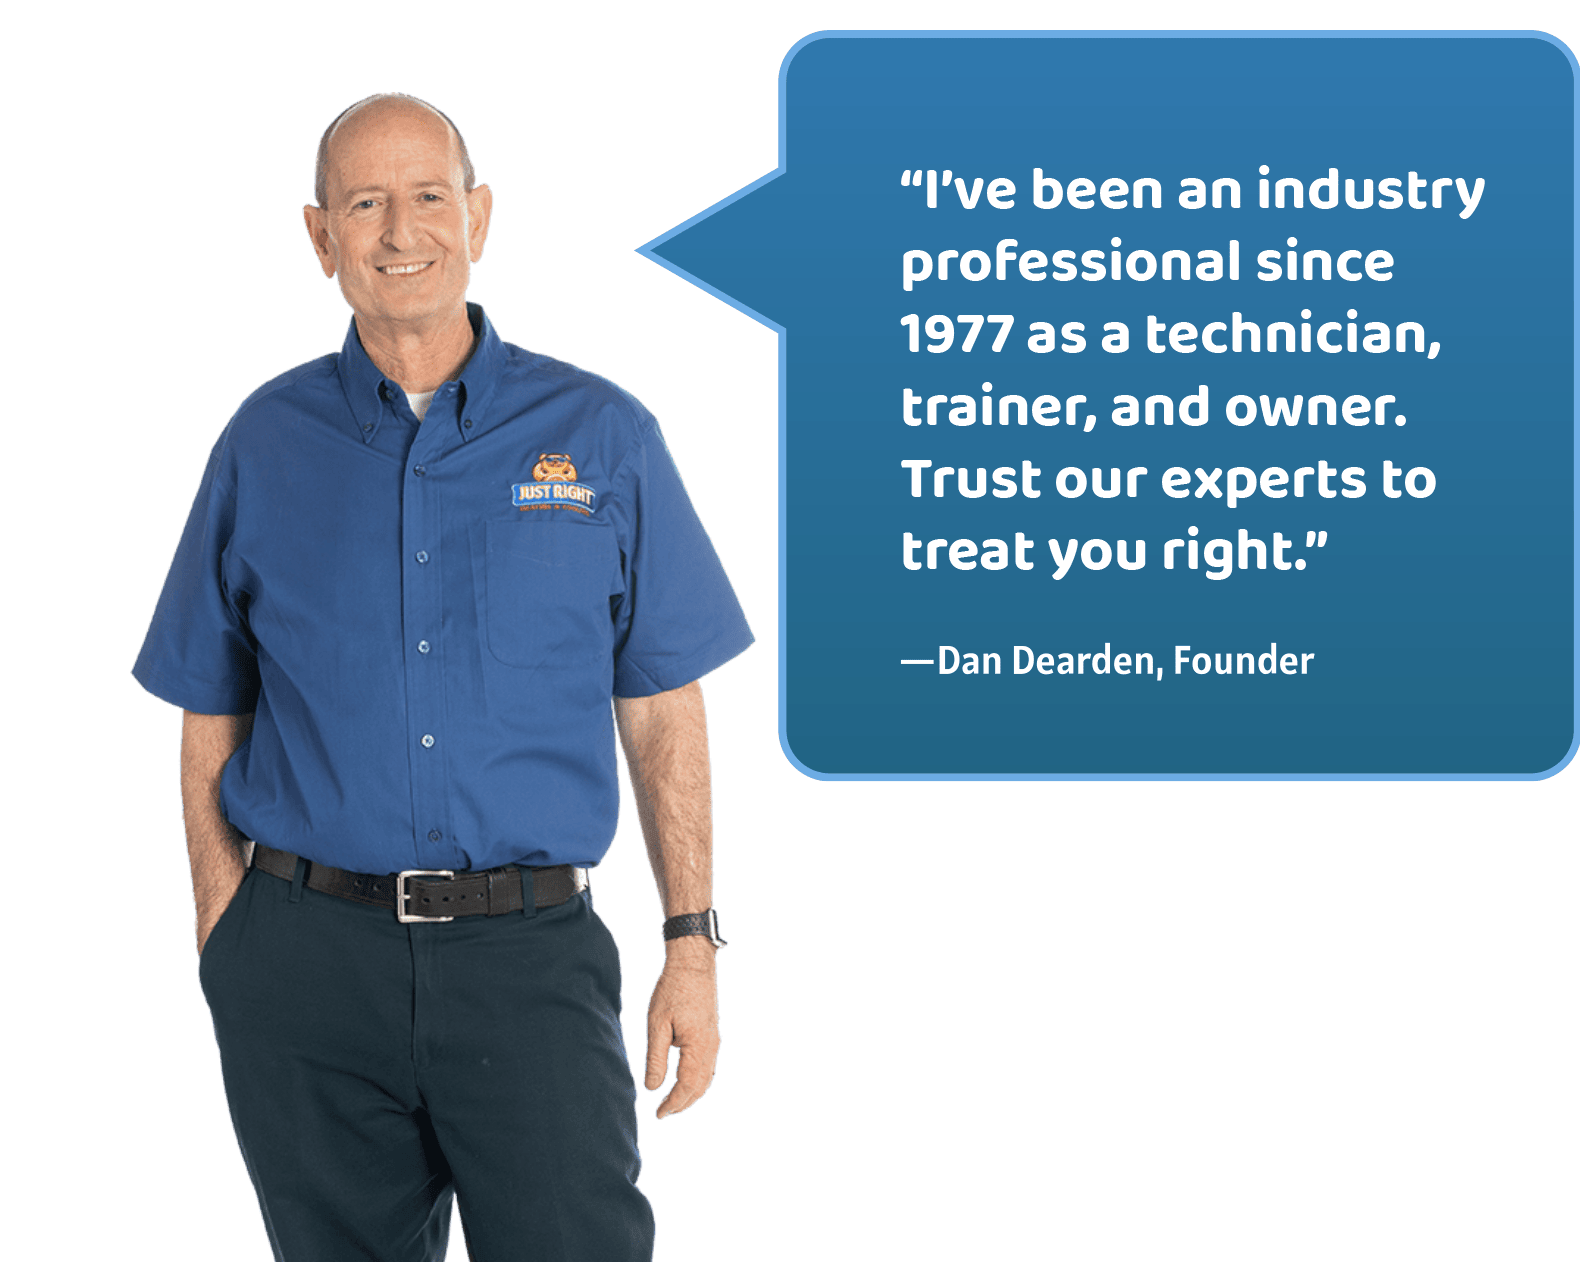 Dan Dearden with quote “I’ve been an industry professional since 1977 as a technician, trainer, and owner. Trust our experts to treat you right.”